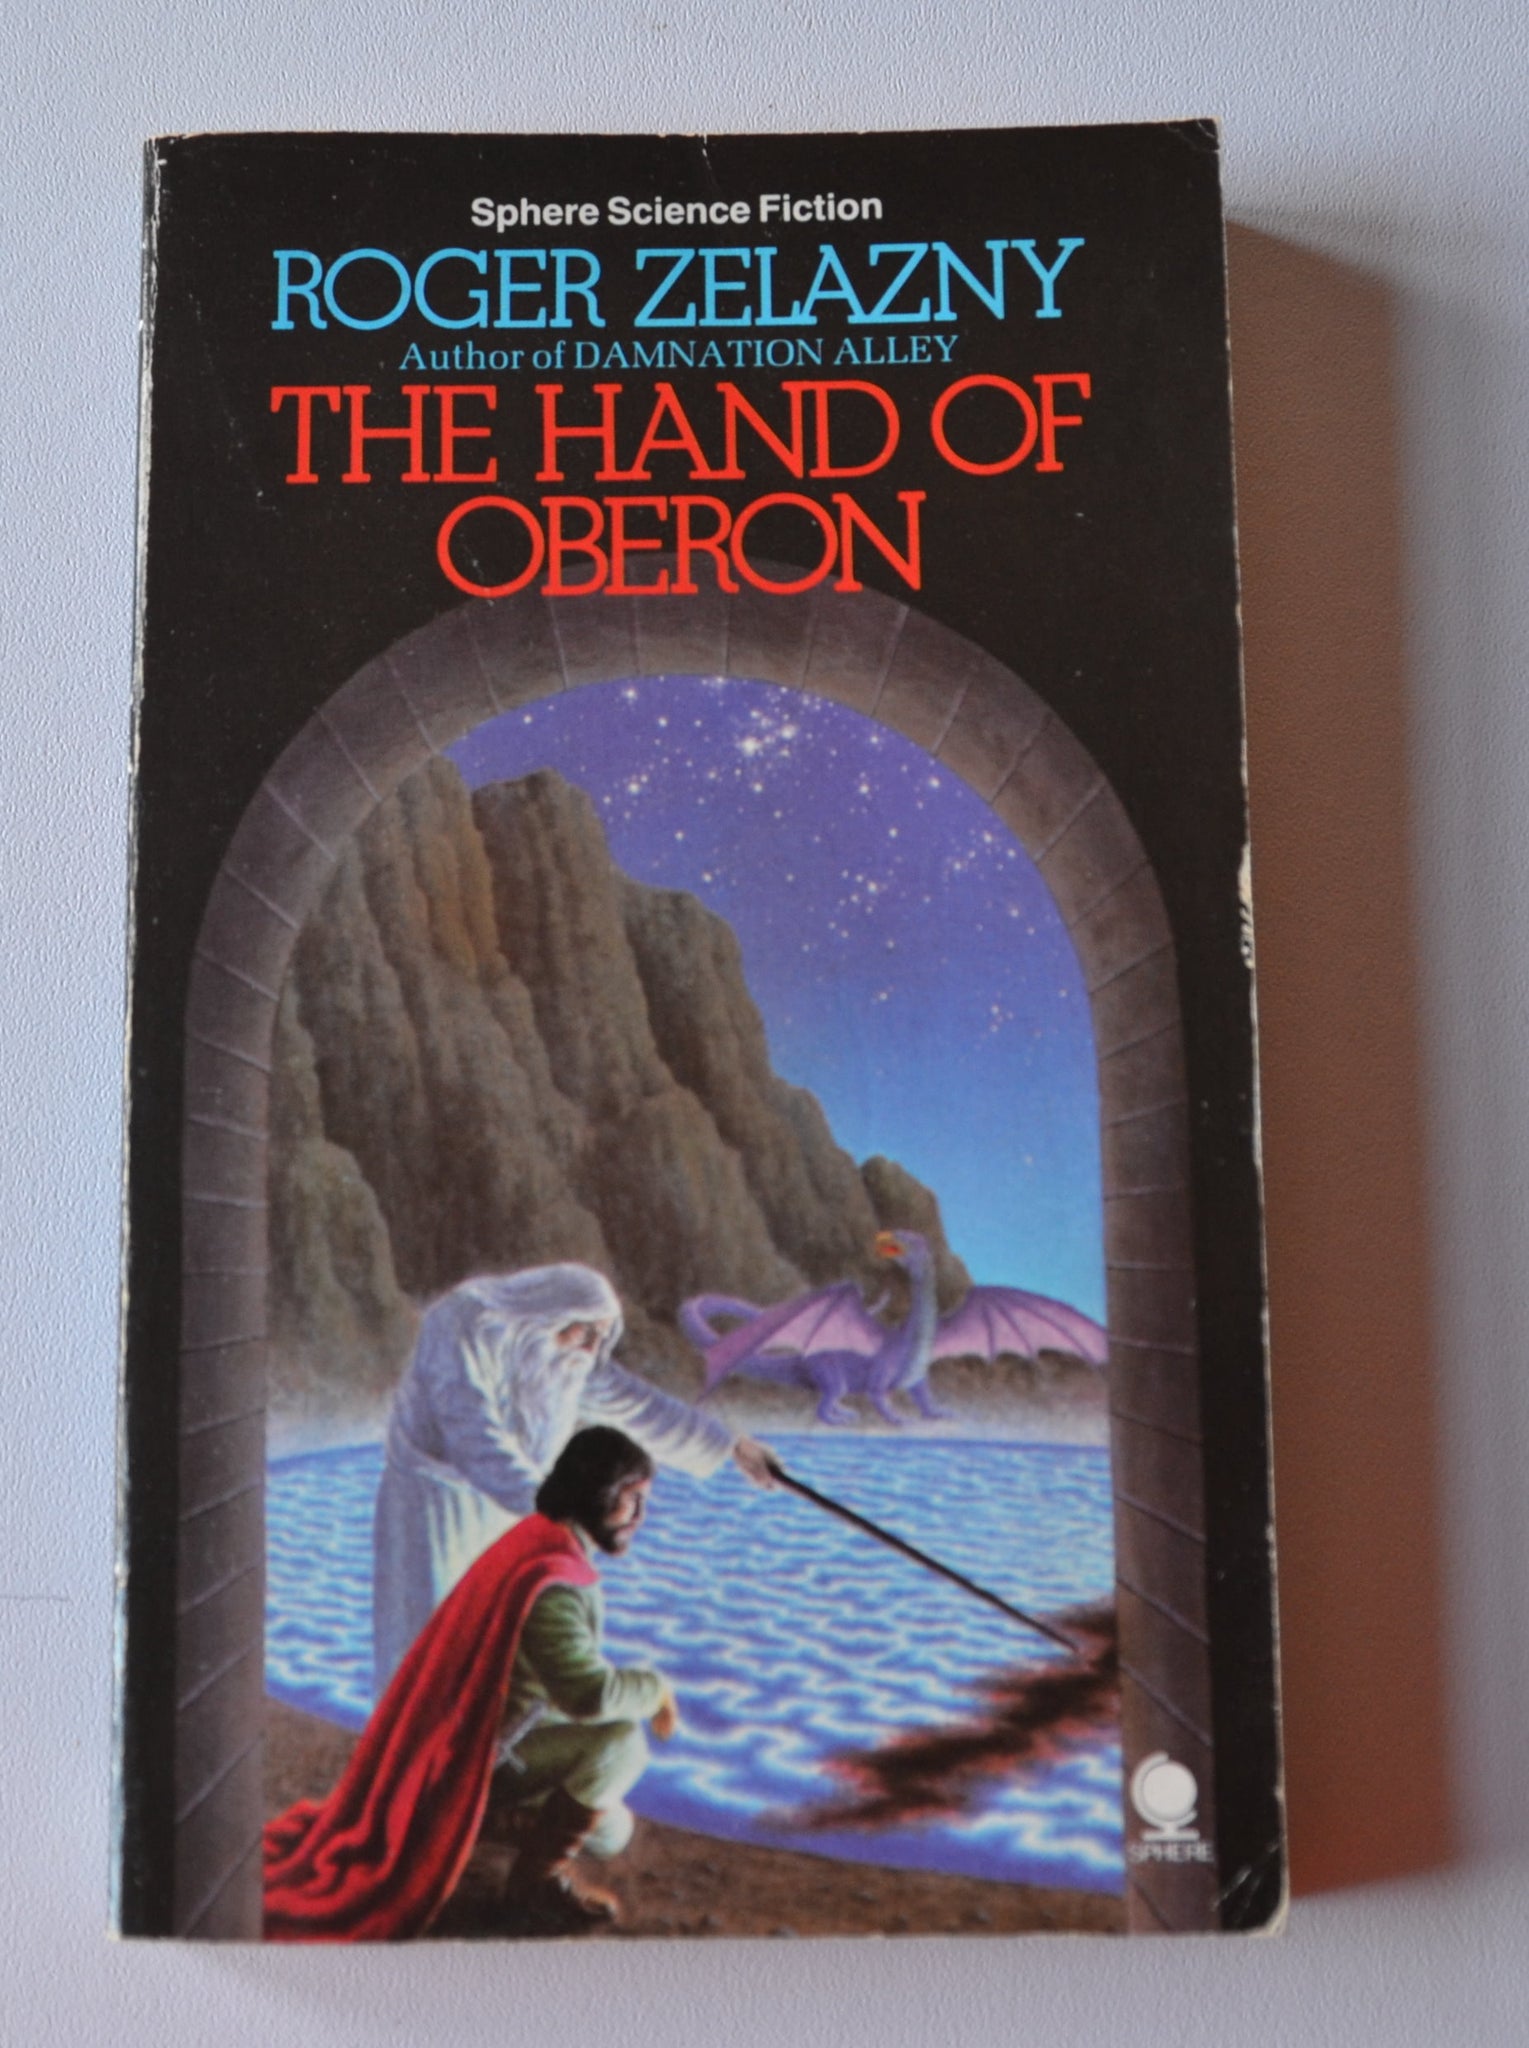 The Chronicles of Amber Book 4 - The Hand of Oberon